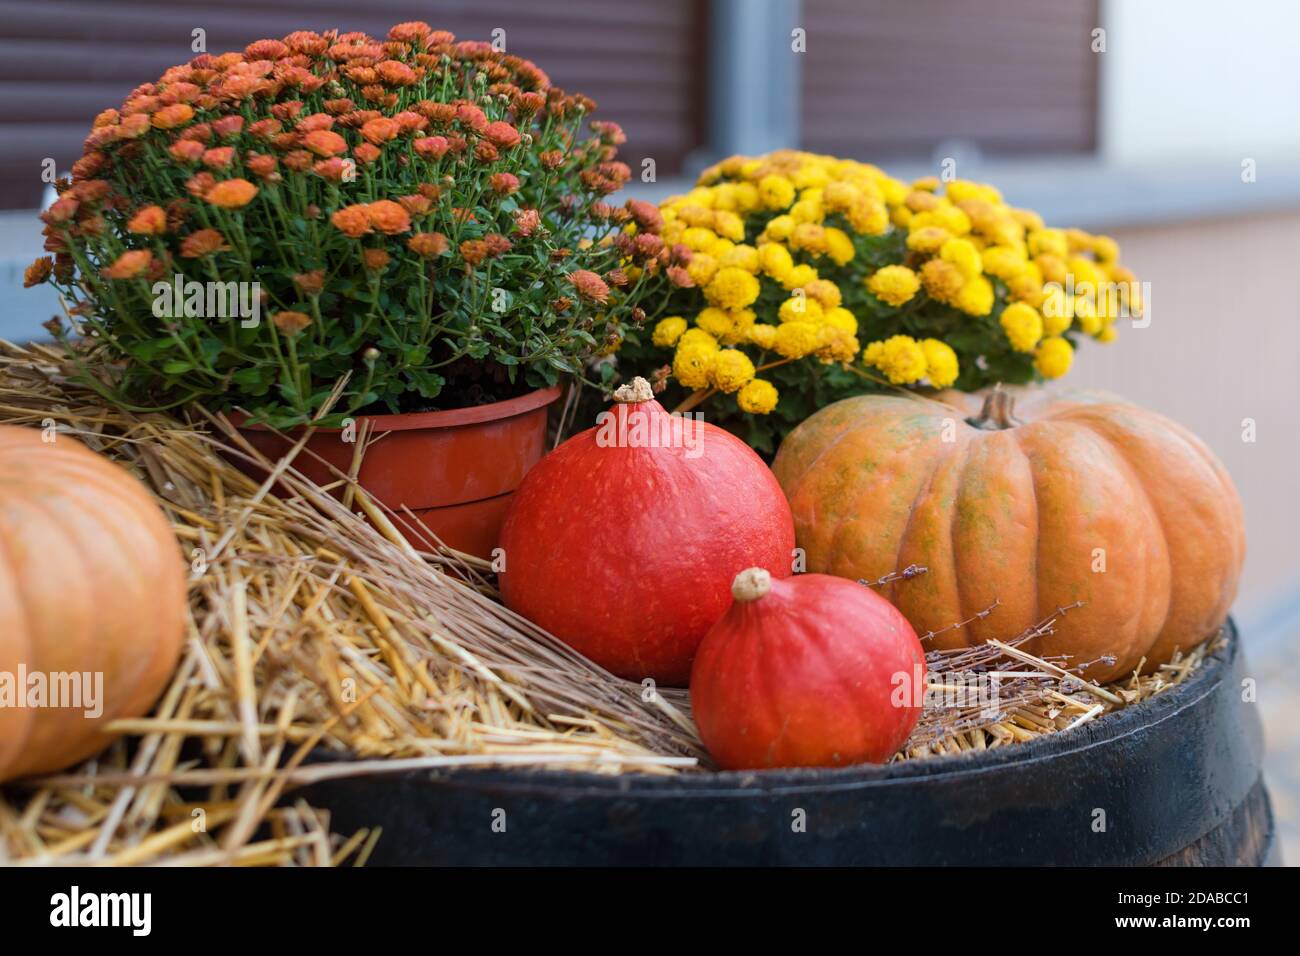 Autumn decor with natural straw bale, pumpkins, flowers and old wooden barrels. Harvest and garden outdoor decorations for Halloween, Thanksgiving Stock Photo